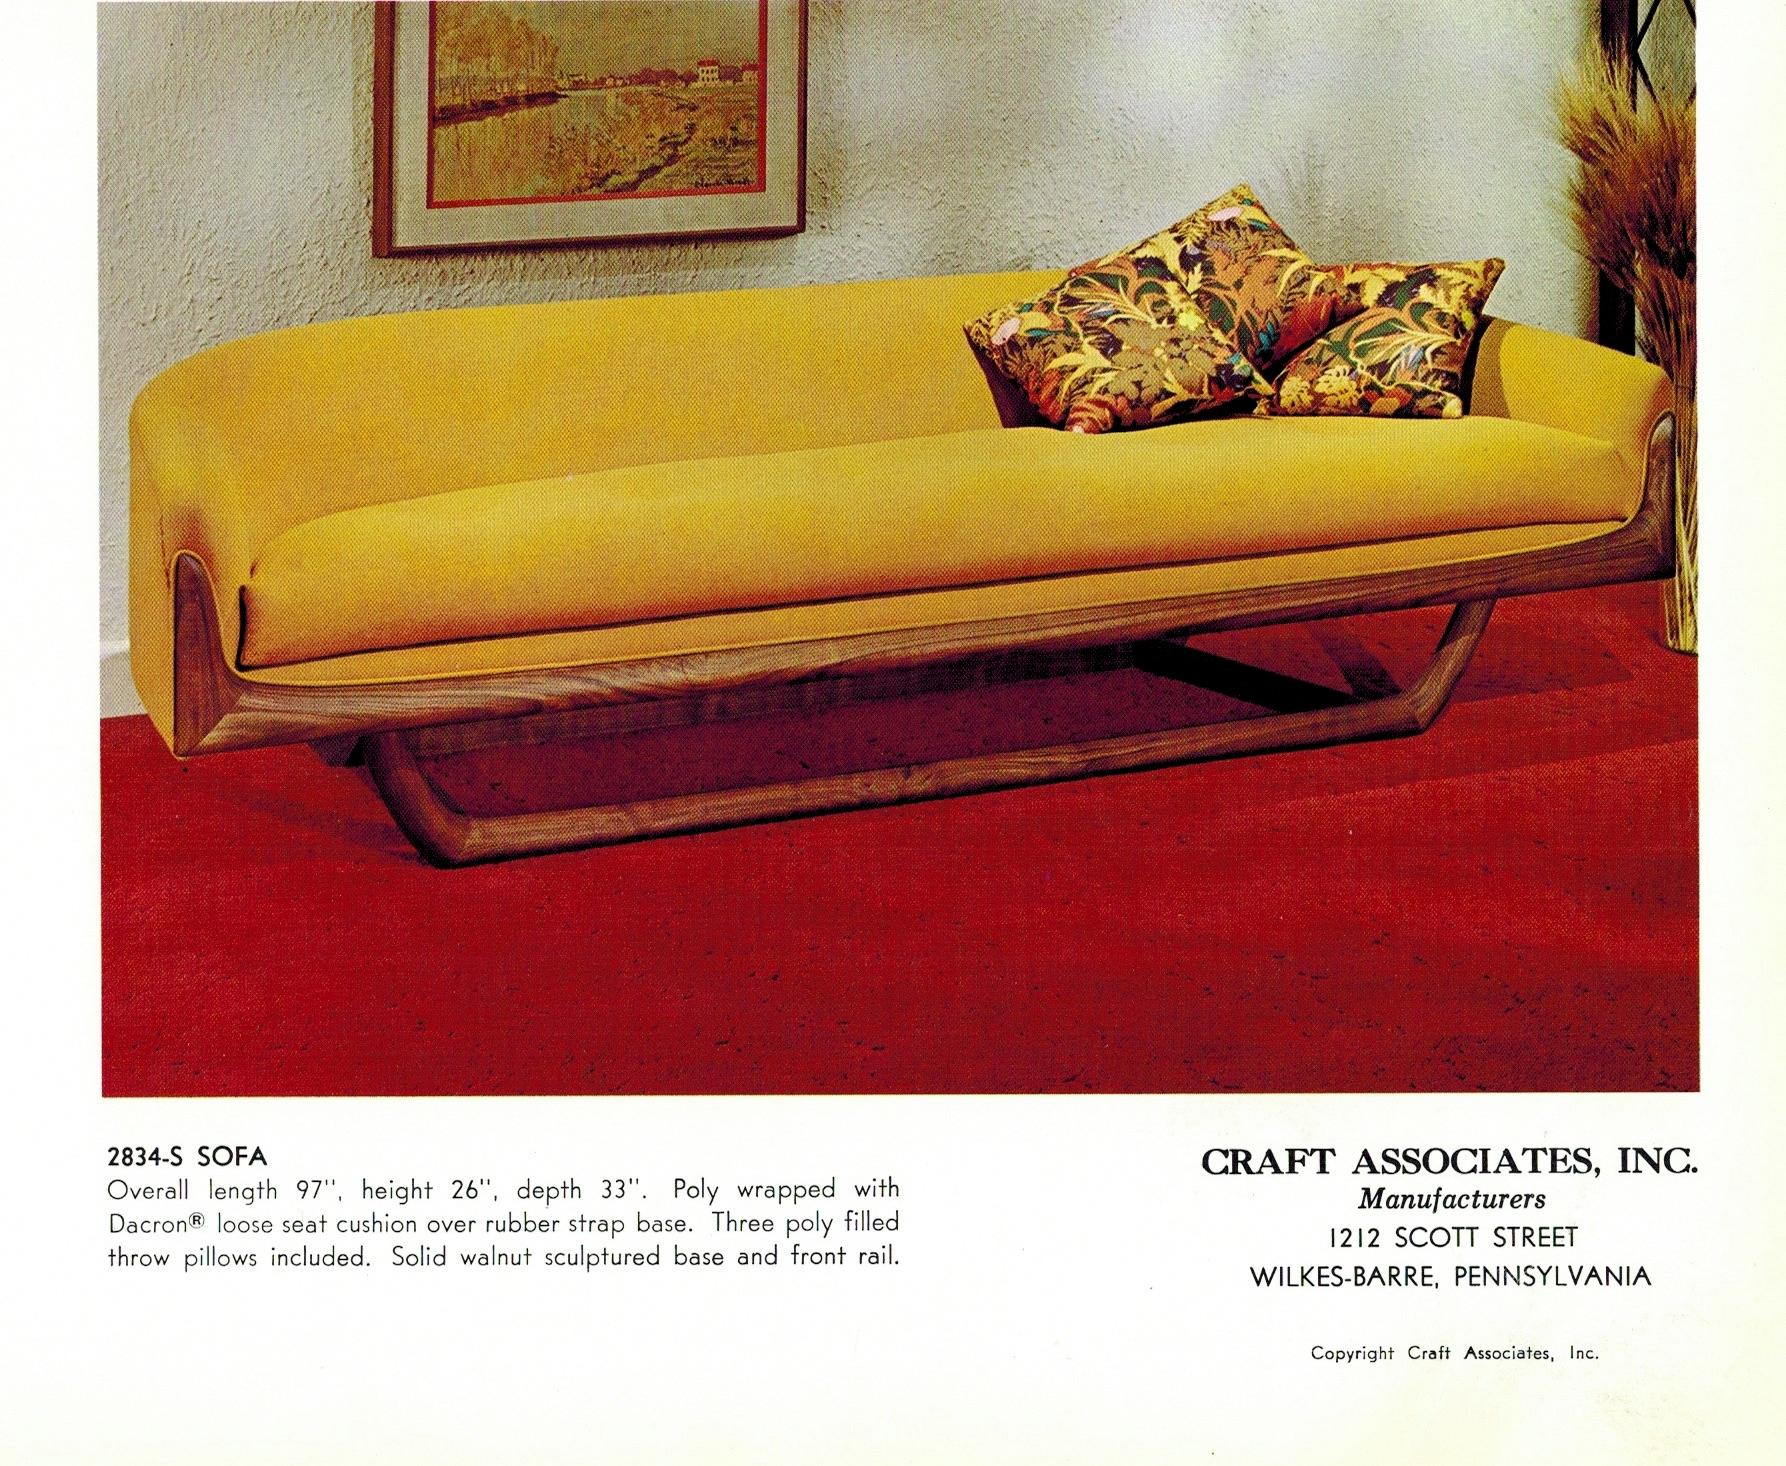 Cloud floating sofa designed by Adrian Pearsall for Craft Associates, circa 1950s.

Newly upholstered in off-white bouclé by Knoll. Sculptural walnut bases fully restored.